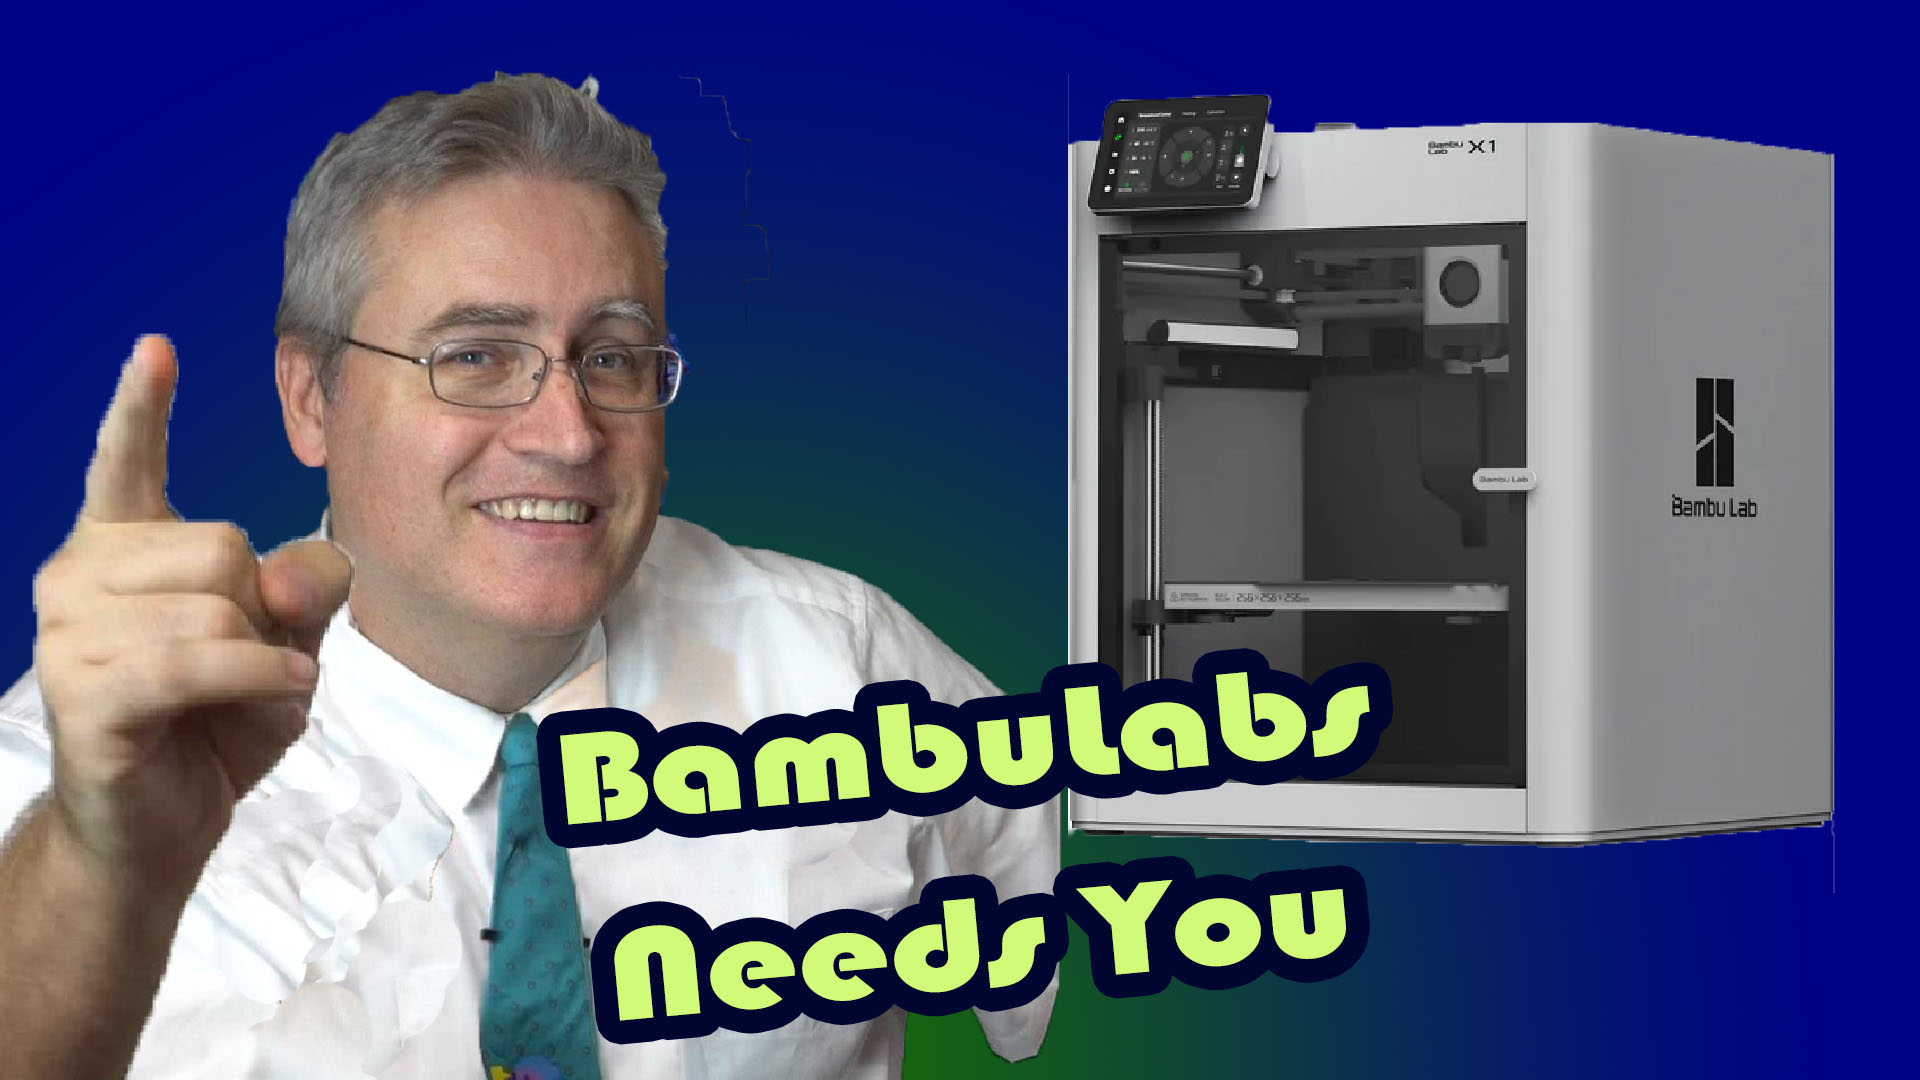 Could Bambu Lab's X1 Series Be The Smartest 3D Printer? « Fabbaloo